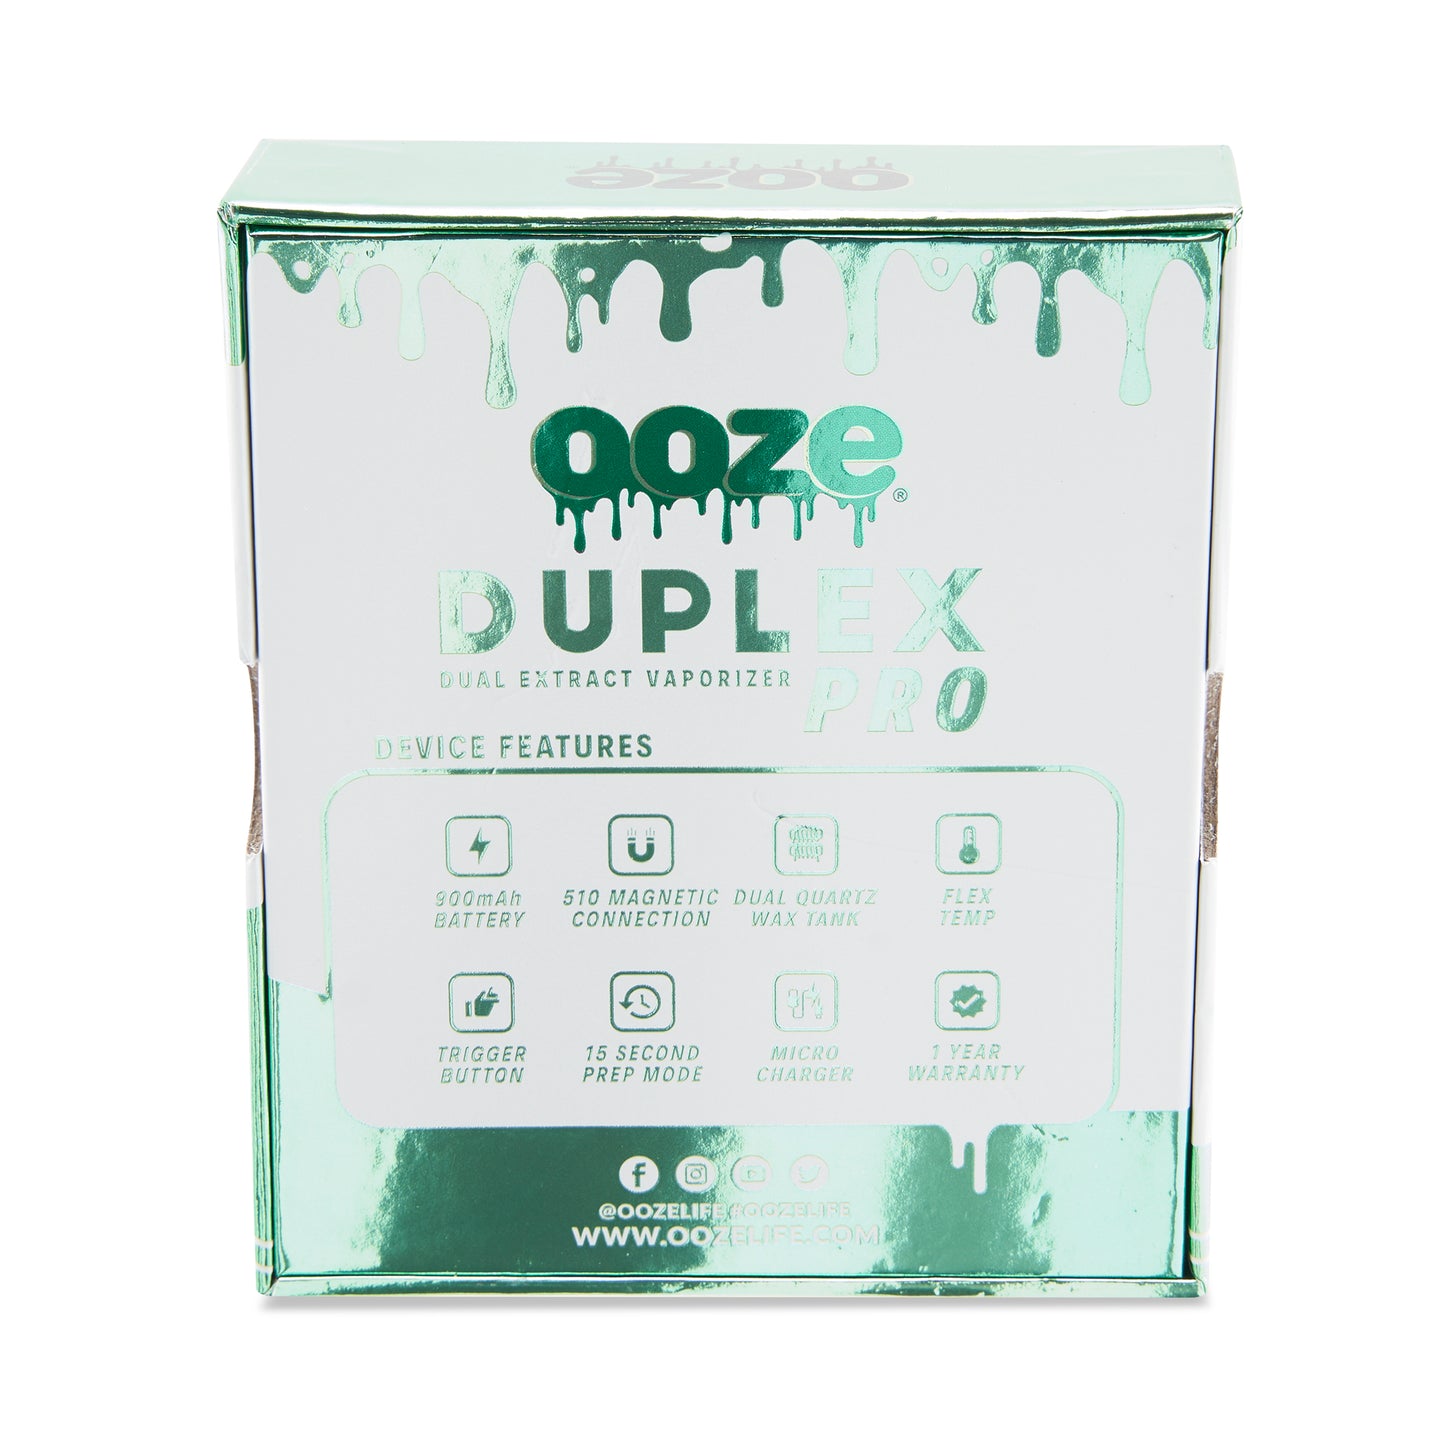 The back of the packaging for The Mary Jade Ooze Duplex Pro Vaporizer